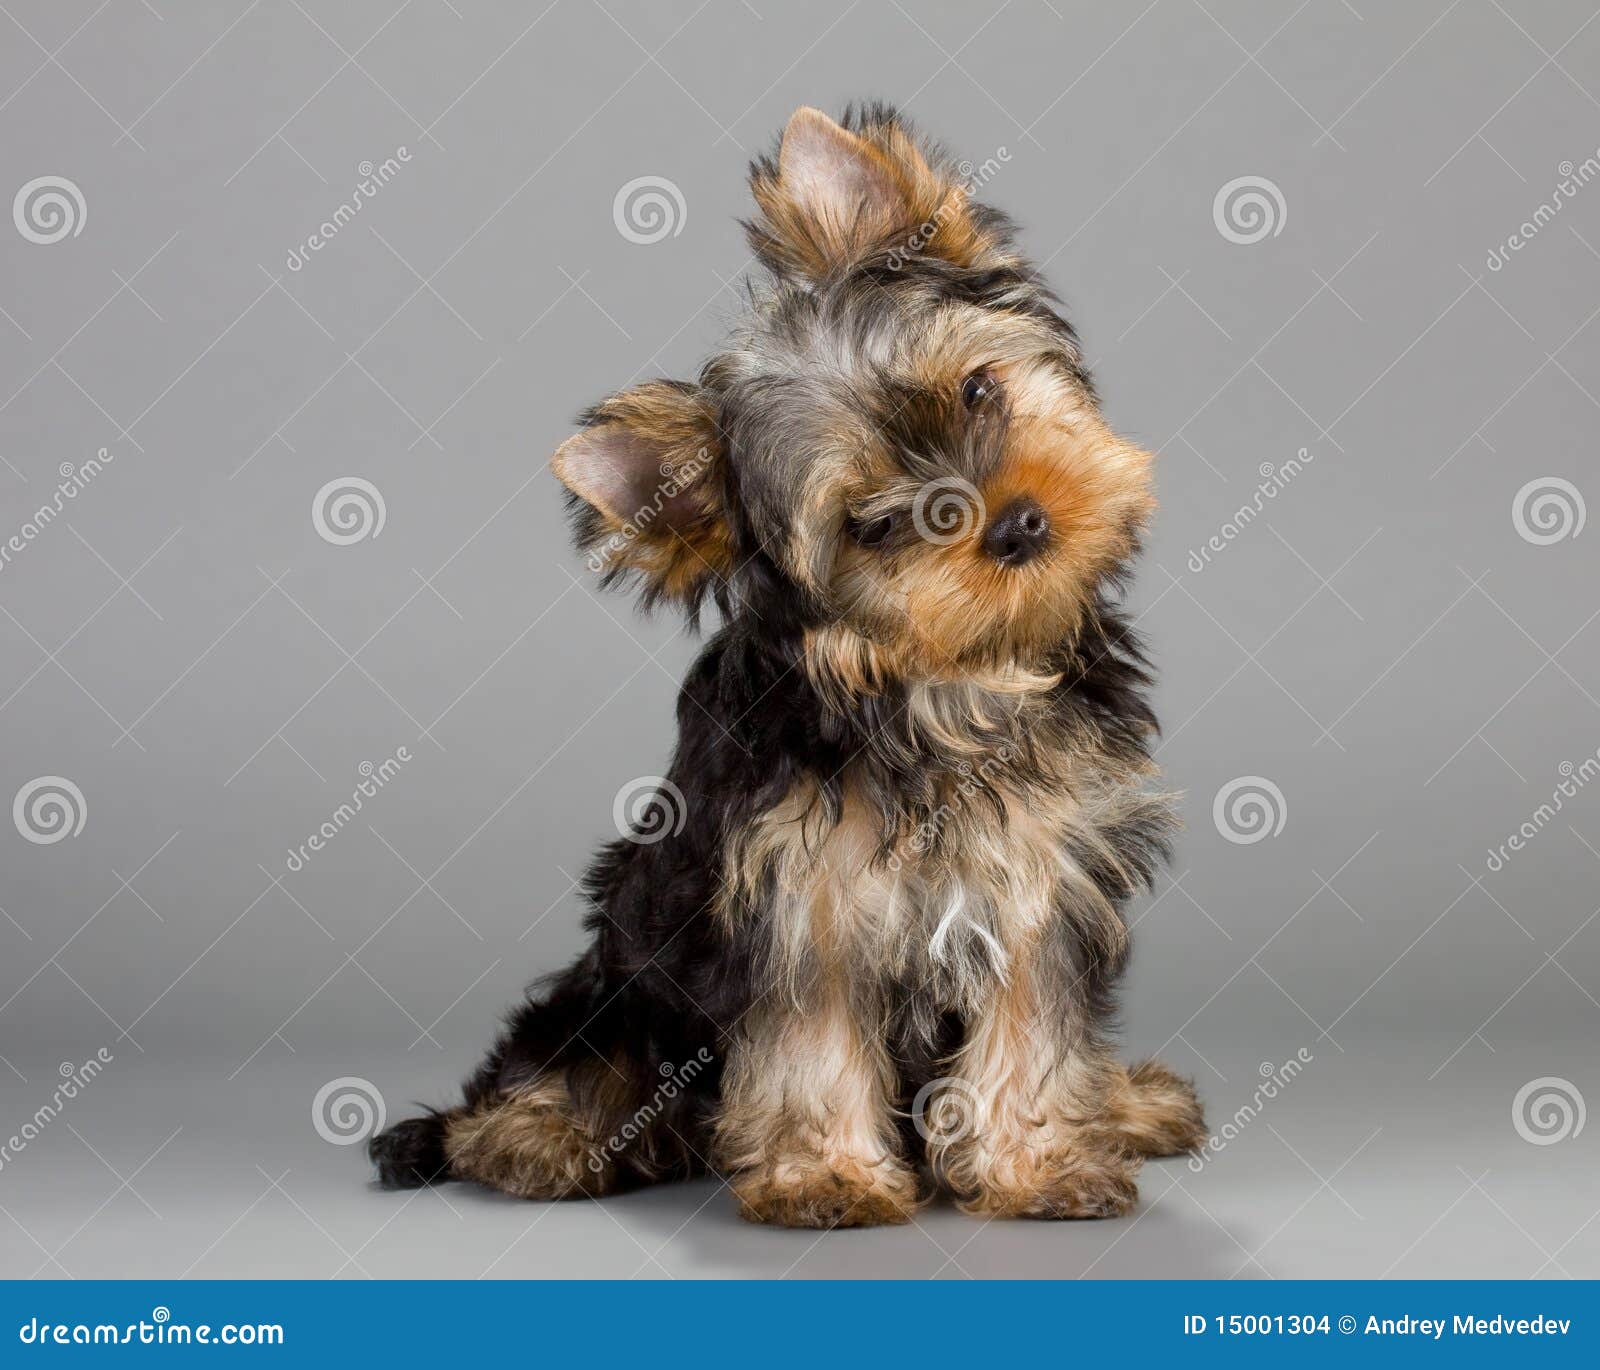 Get yorkshire terrier clothing patterns